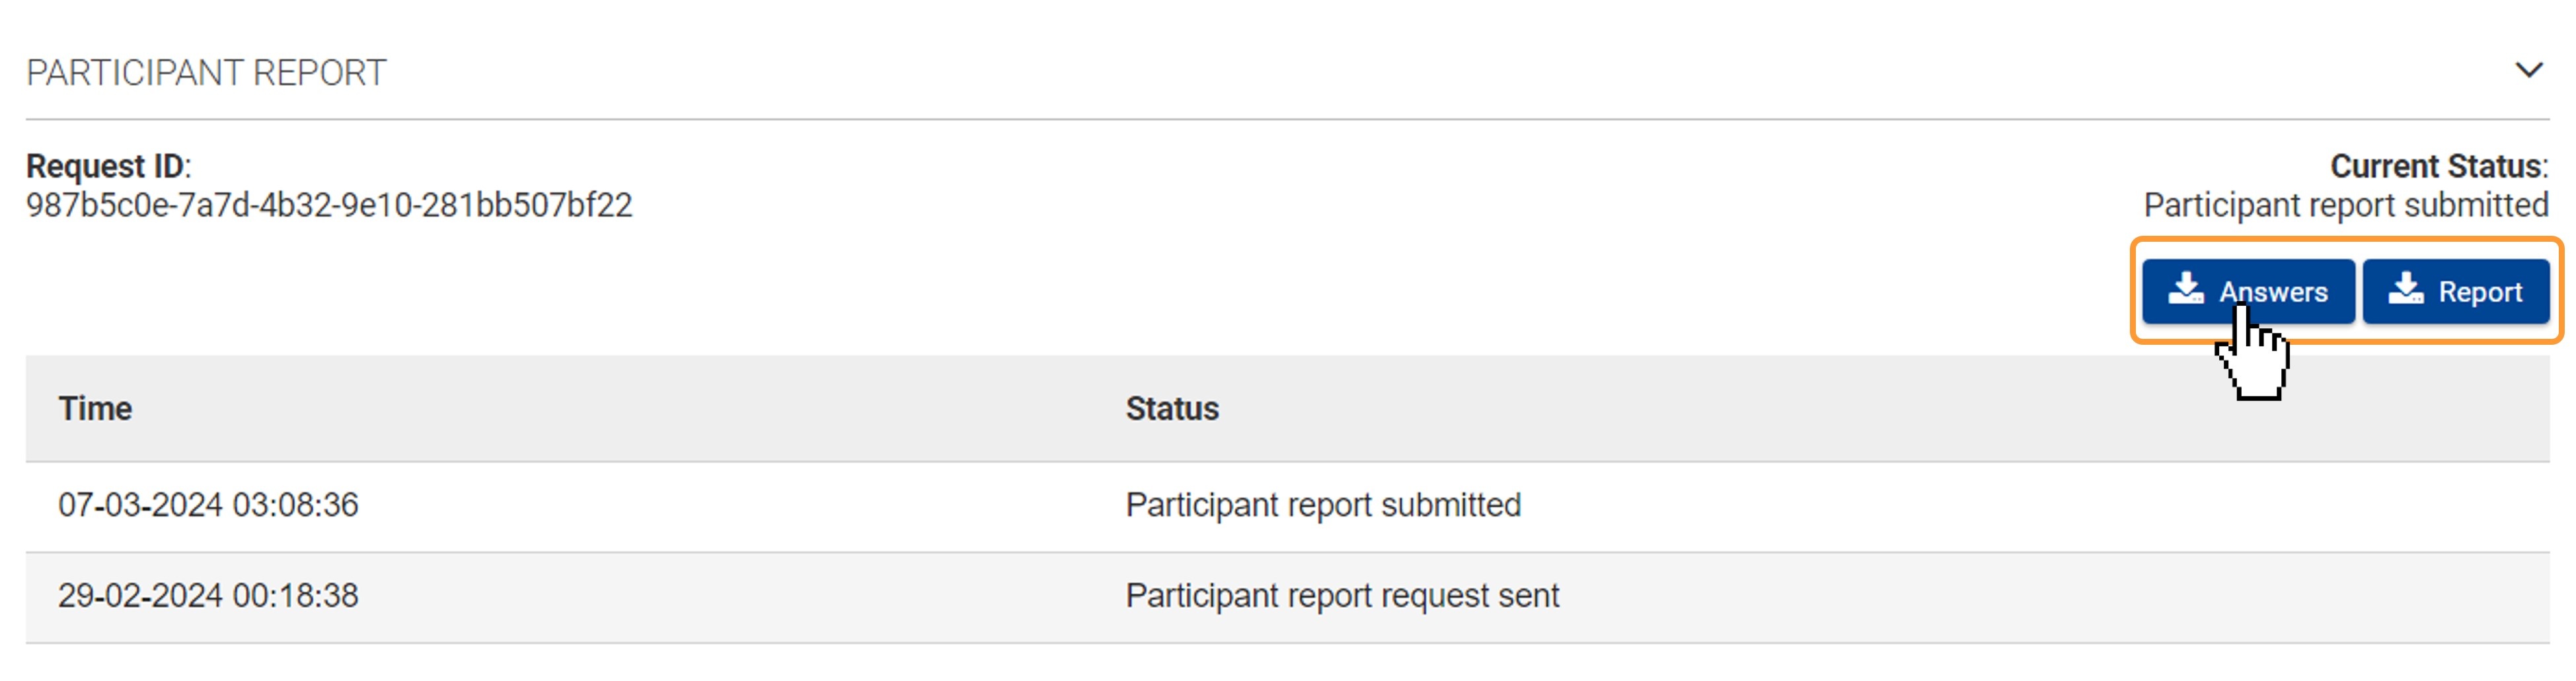 Download the submitted participant report